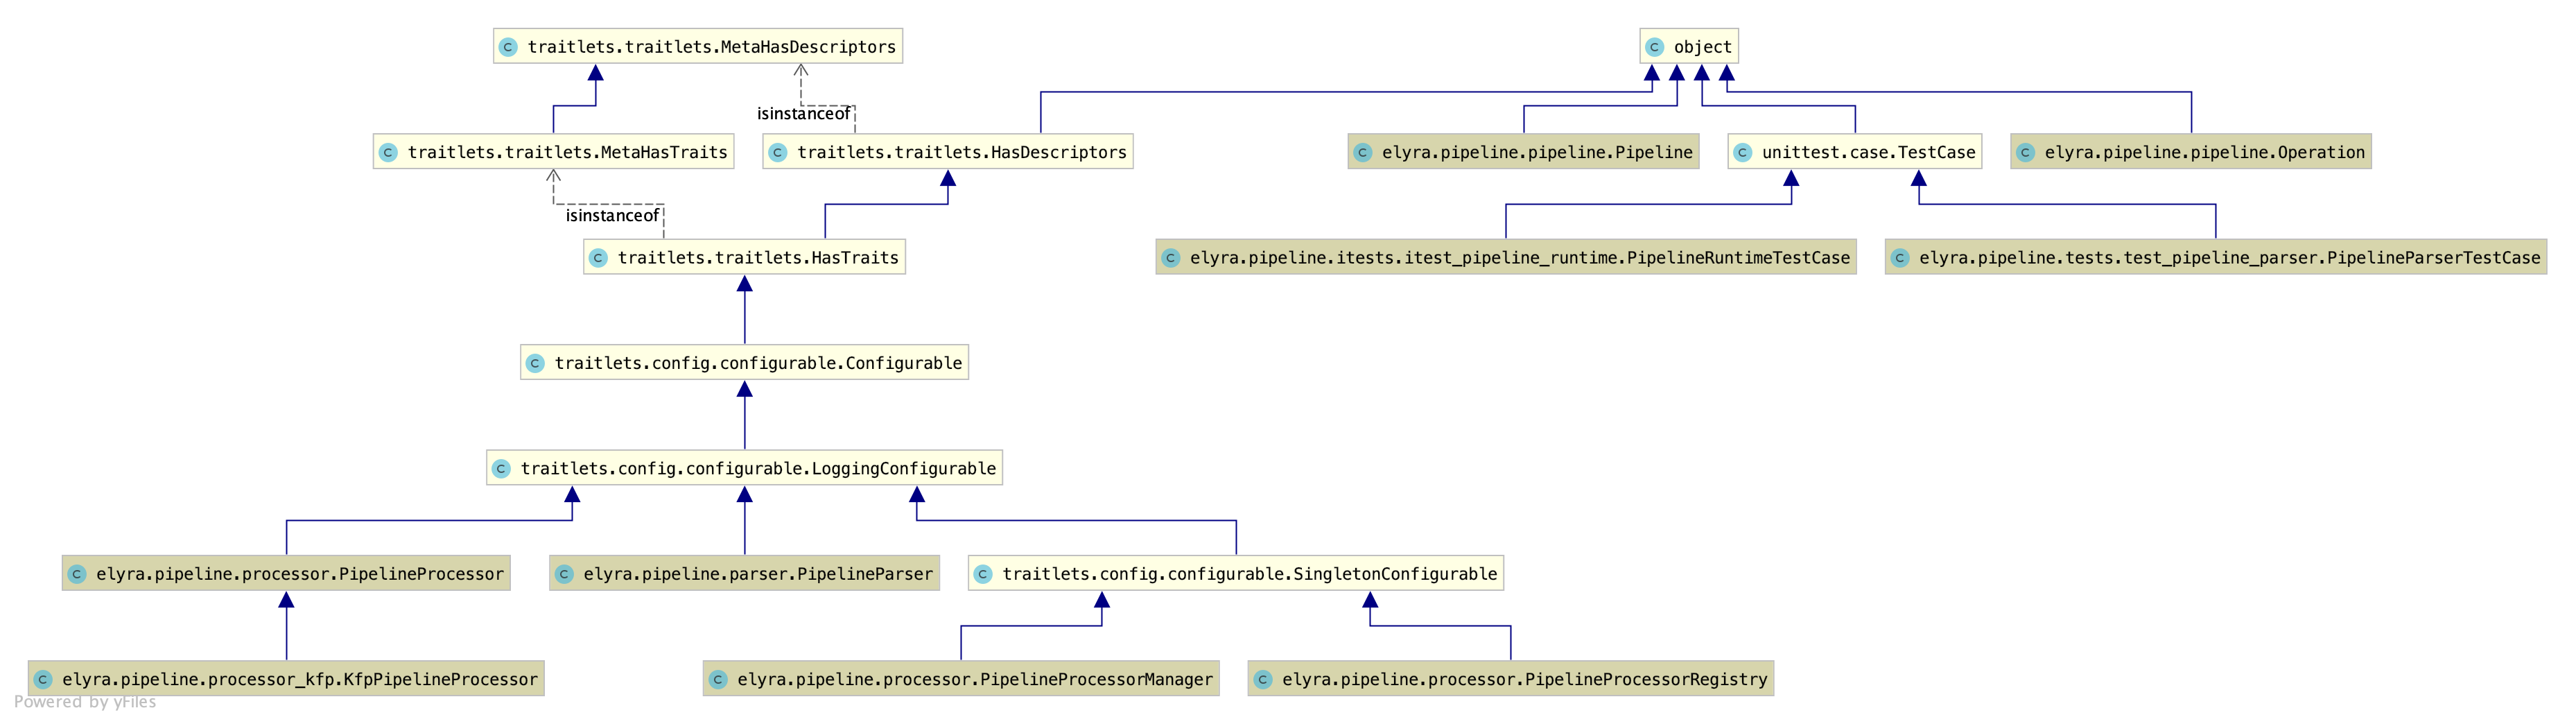 ../_images/pipeline-class-hierarchy.png